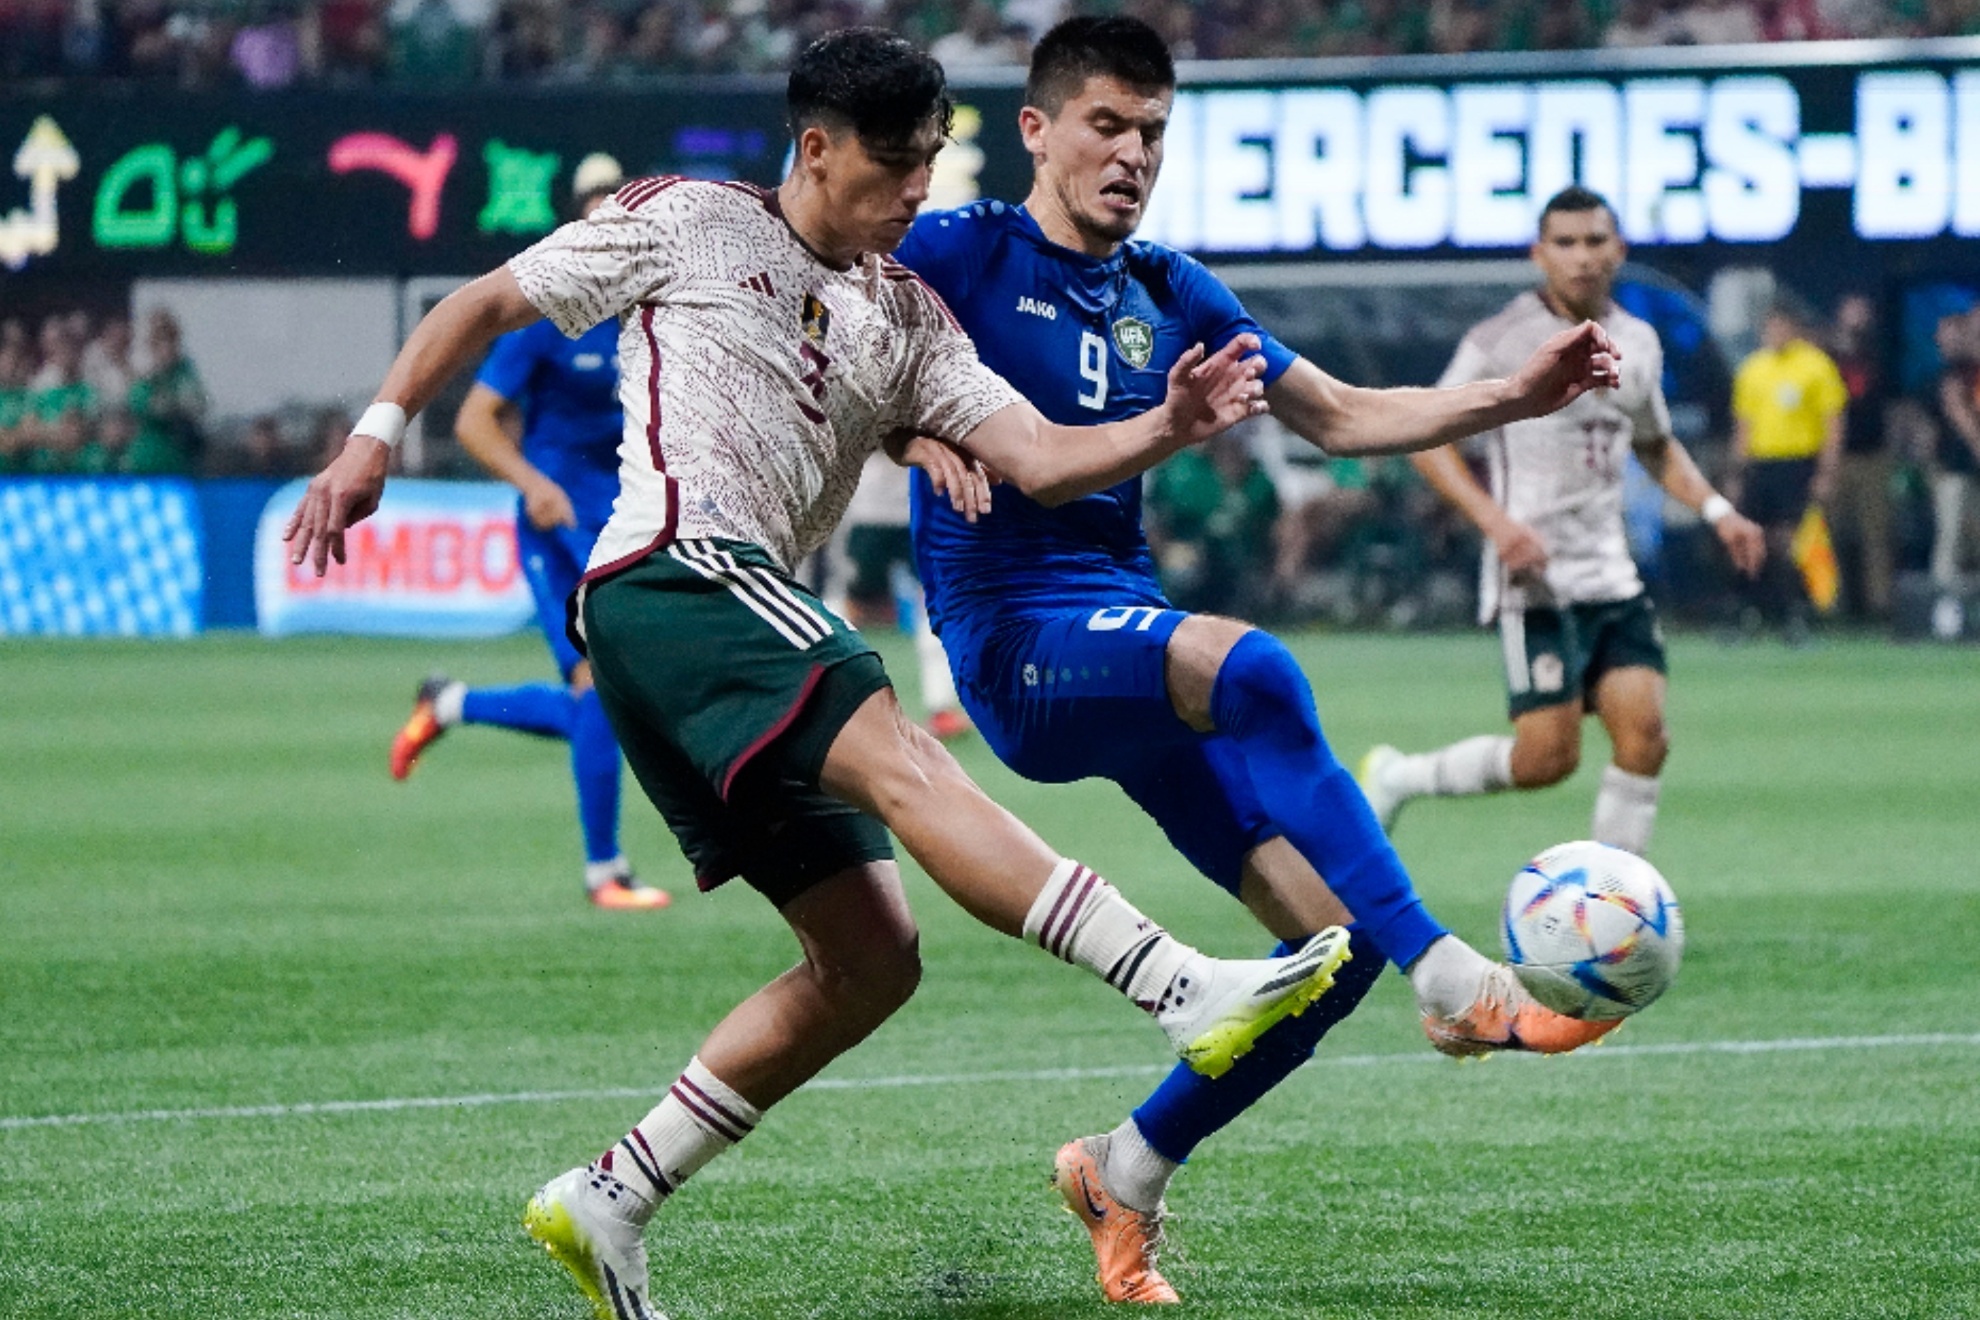 The Mexico National Team couldnt beat Uzbekistan in a friendly game on Tuesday